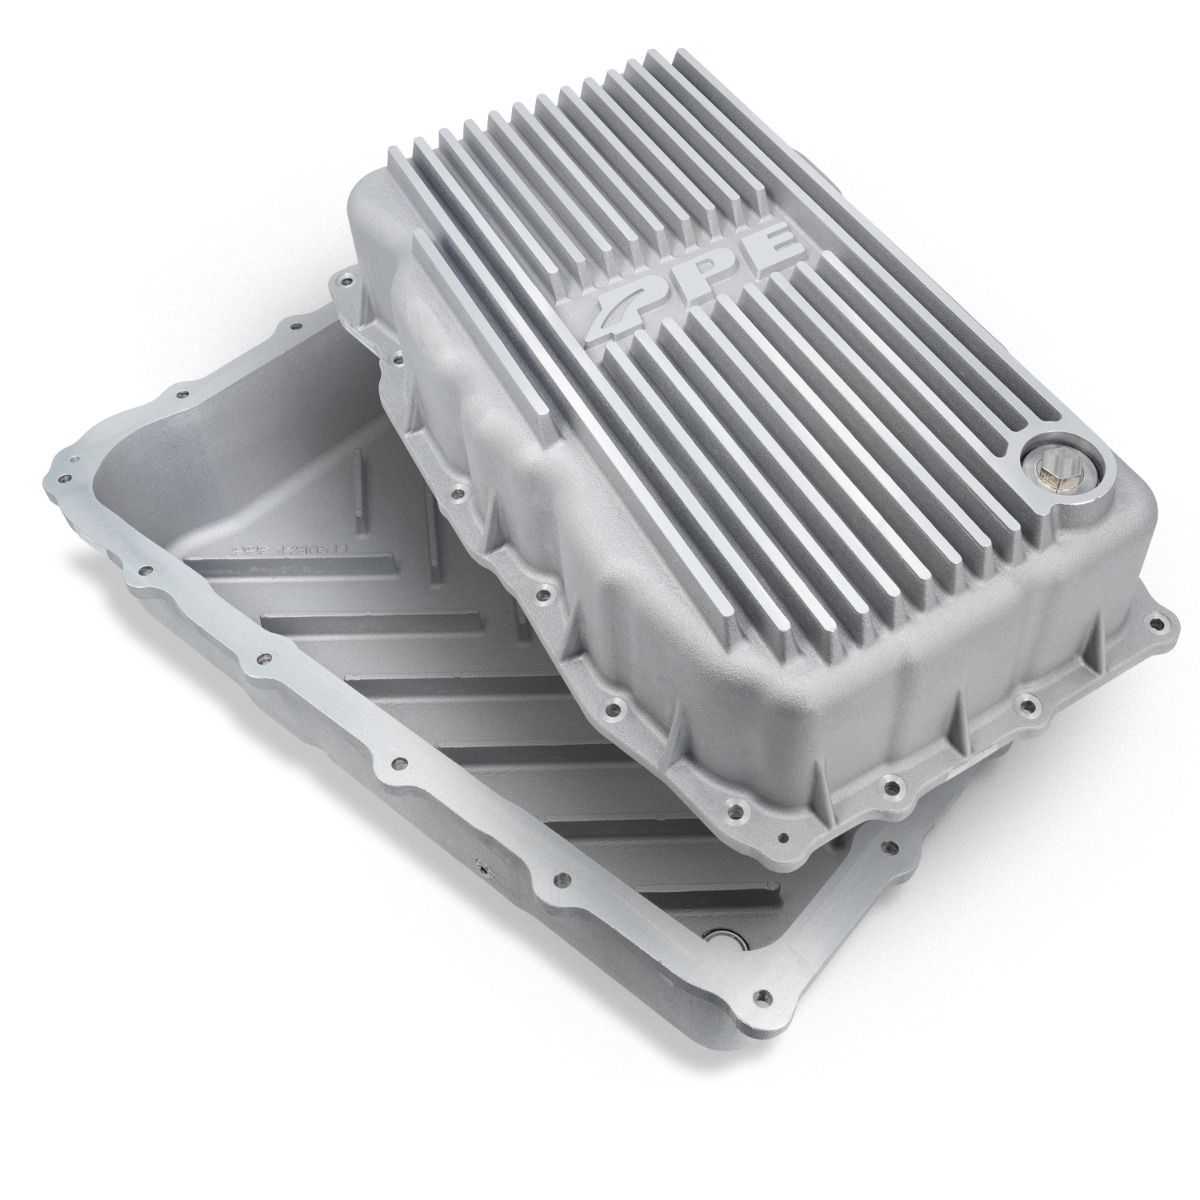 PPE - PPE Raw Aluminum Deep Transmission Pan For 2019+ Chevy GMC 3.0L Duramax 10L80